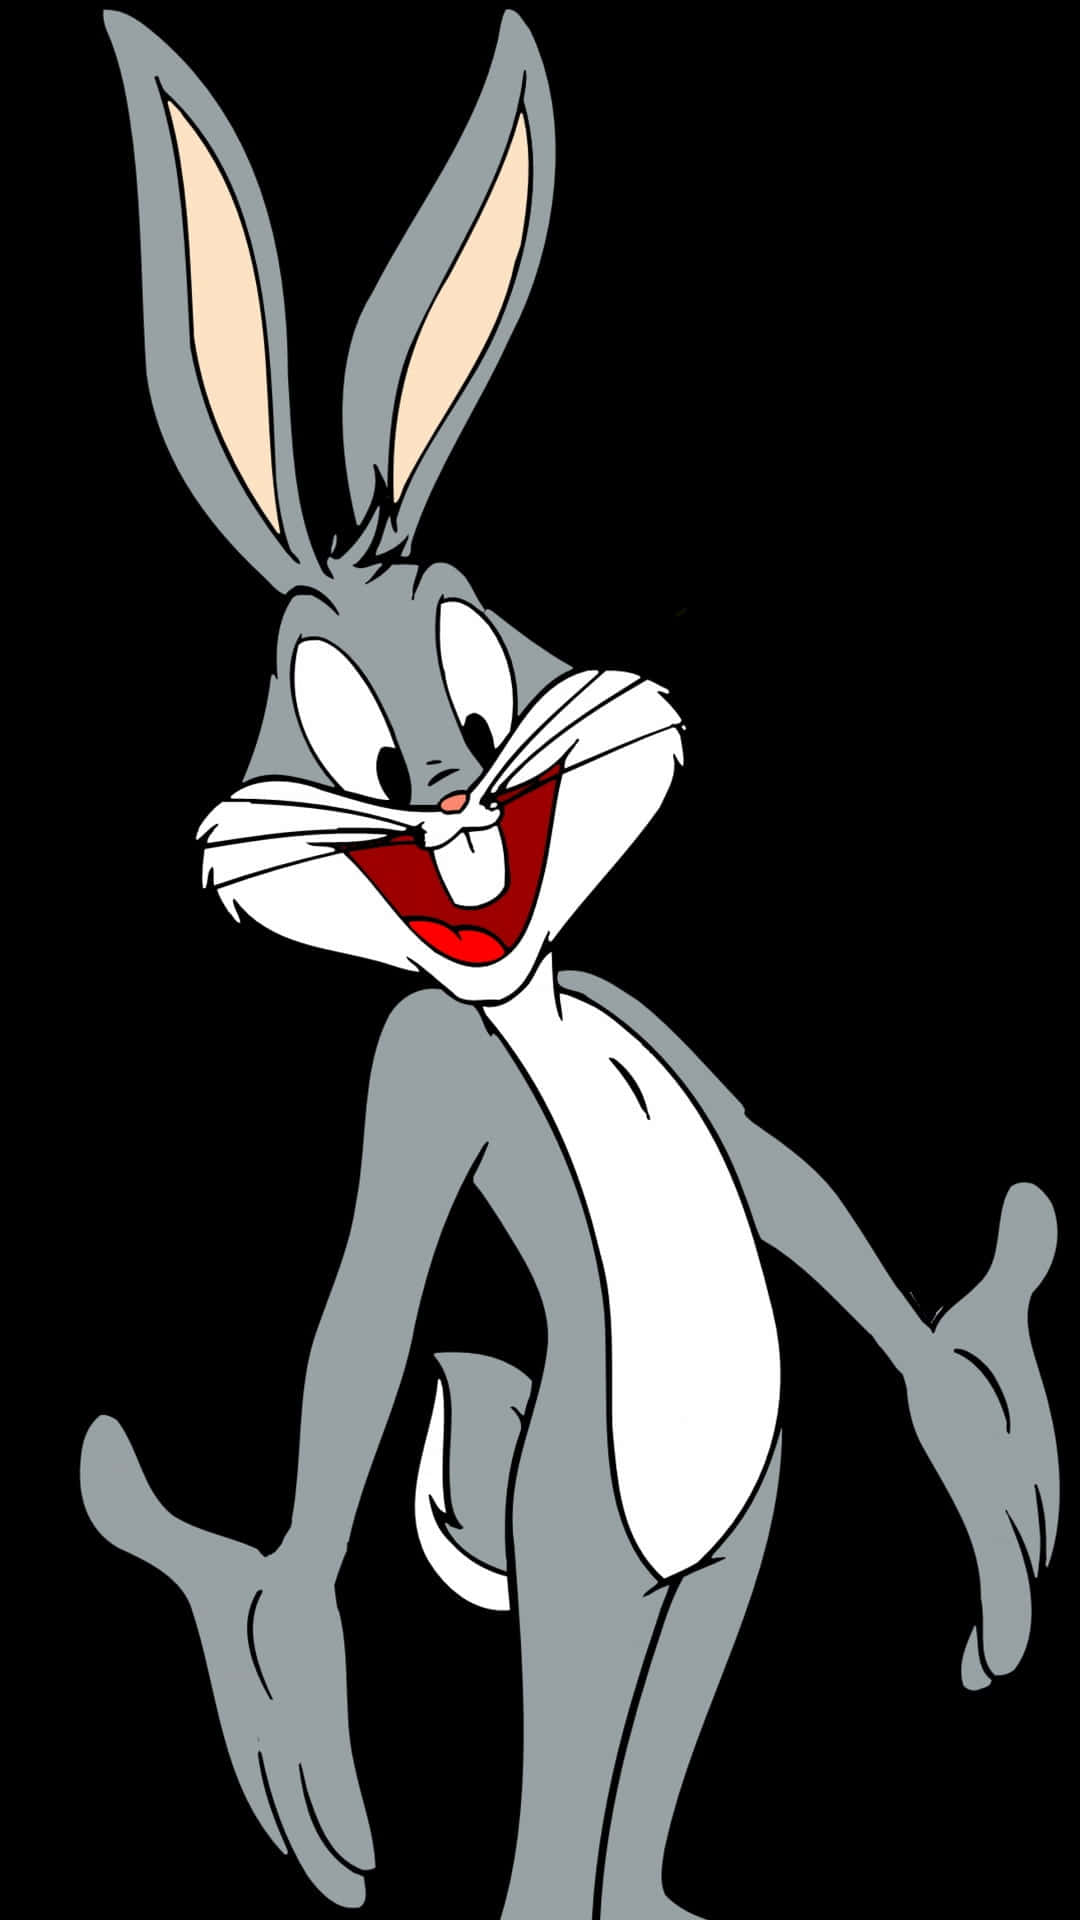 Celebrate your inner cartoon fan with the Bugs Bunny iPhone Wallpaper